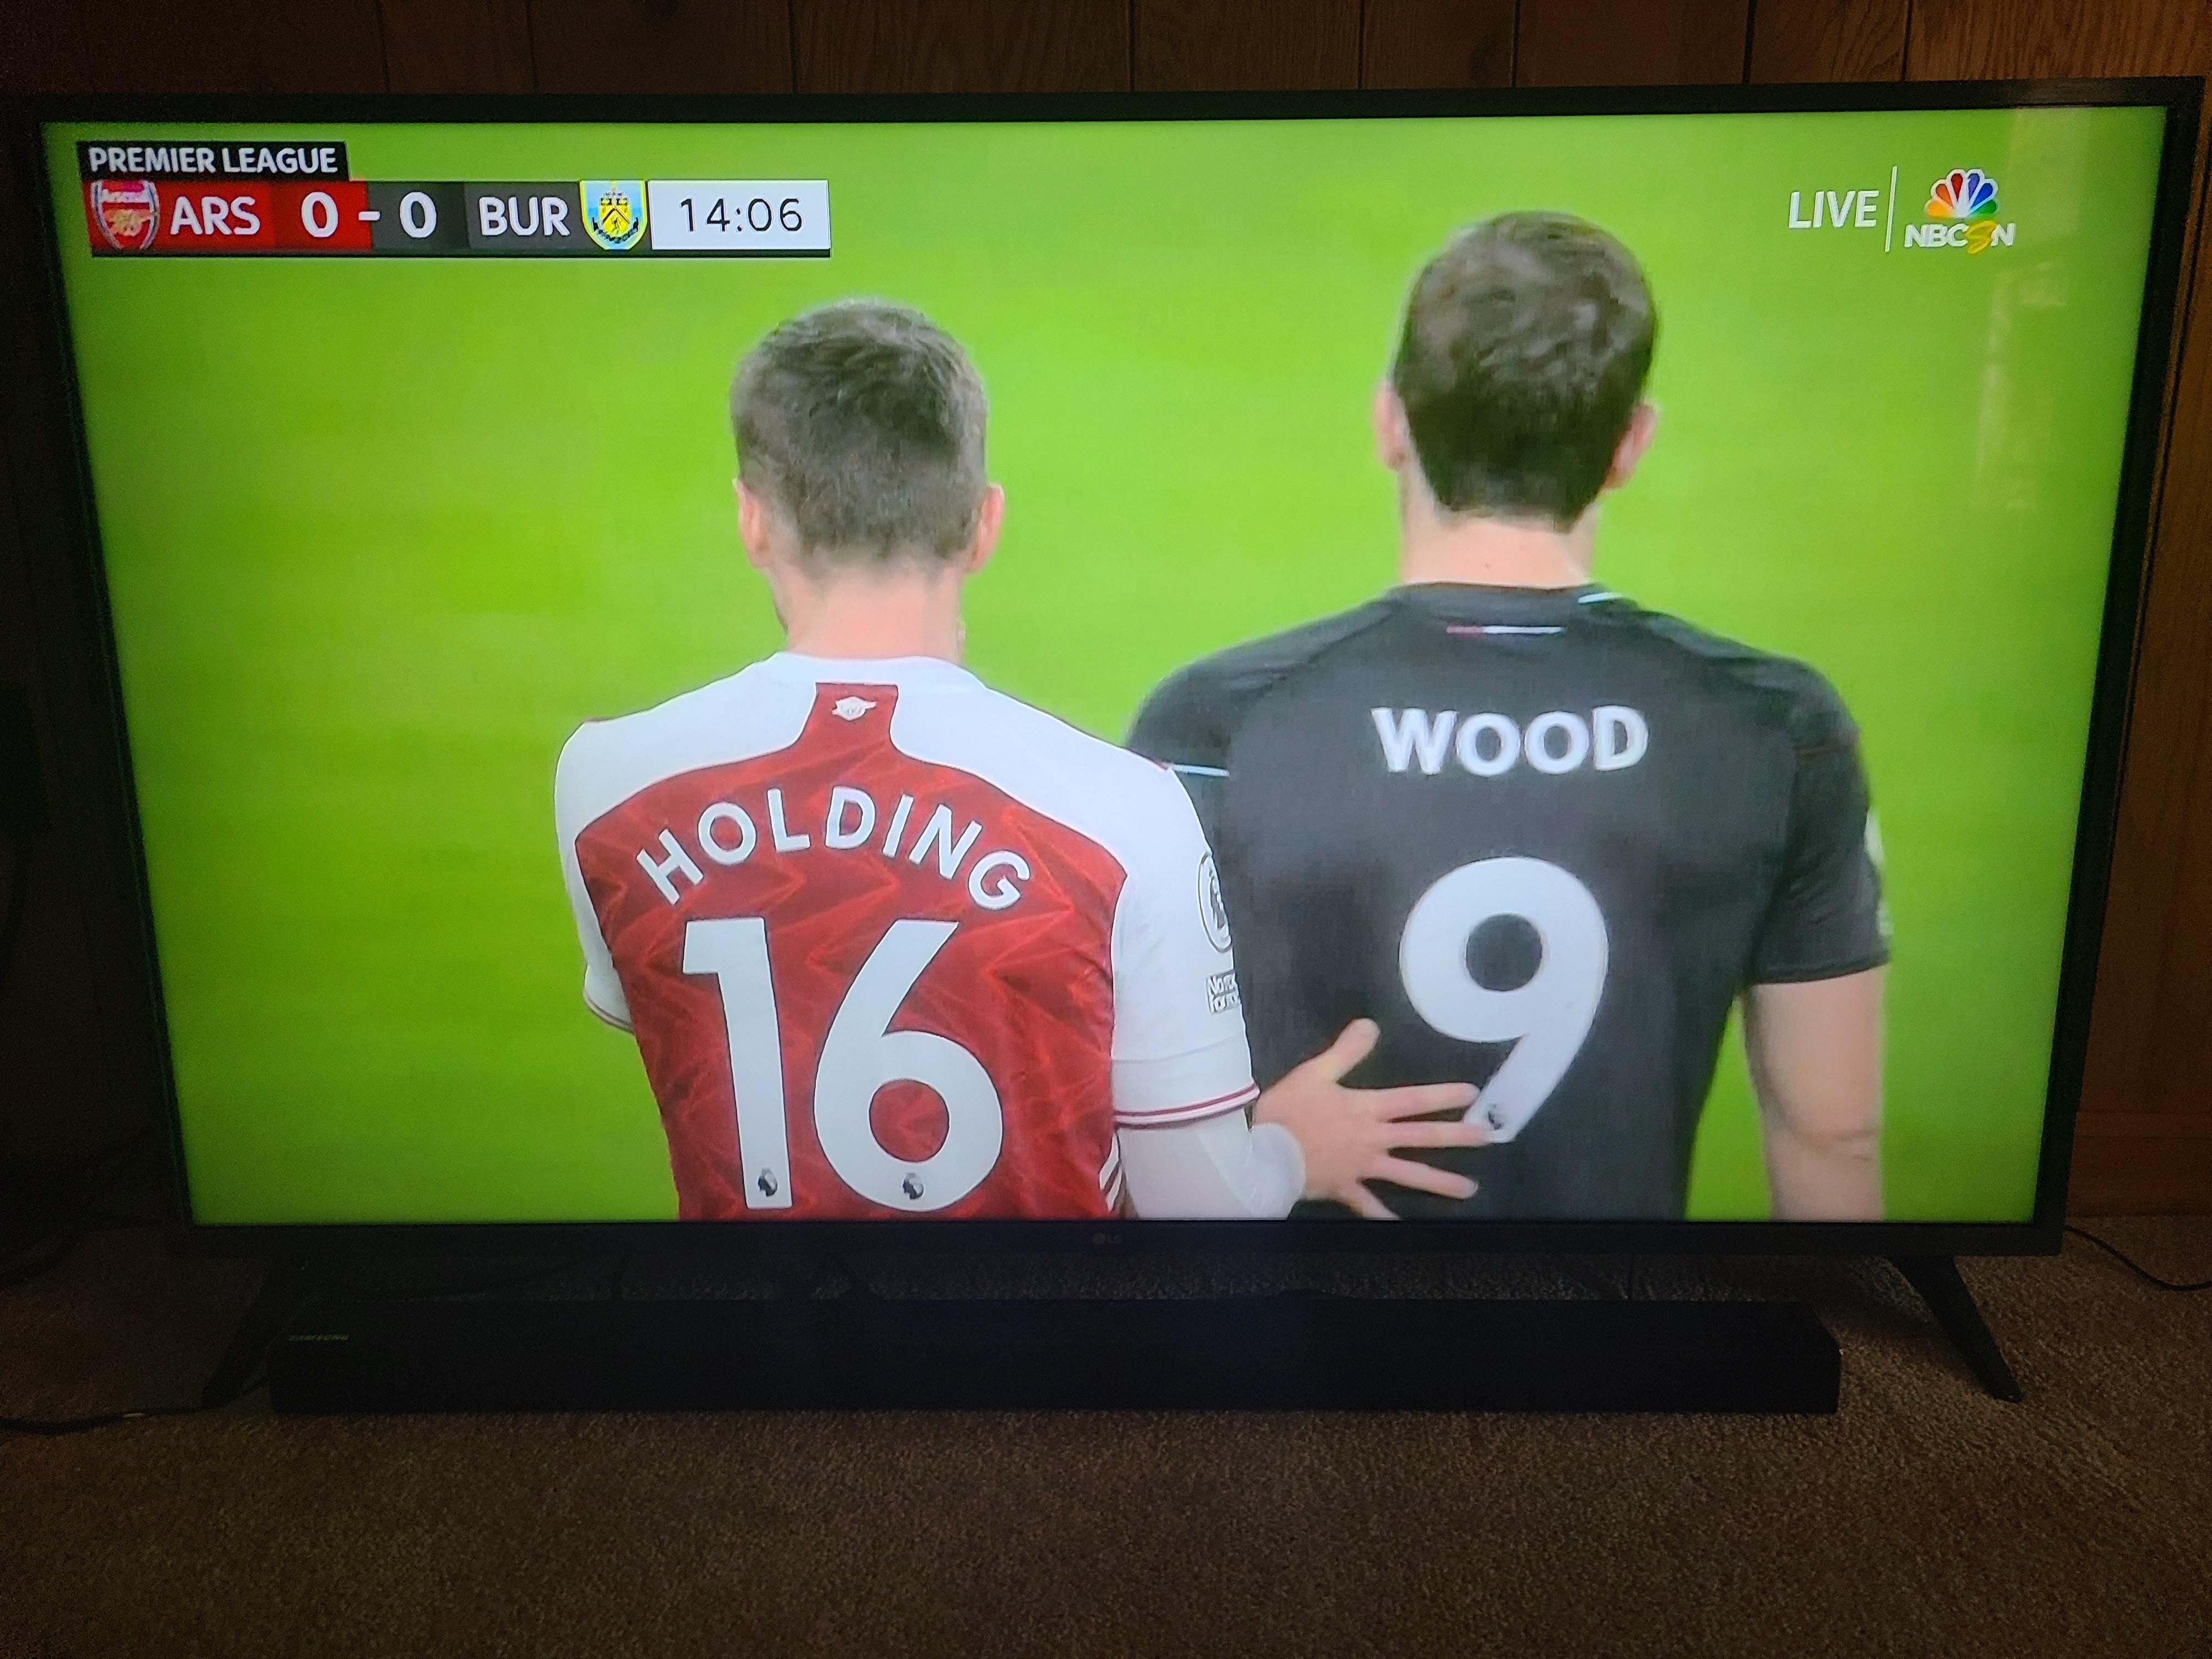 There some strange pairings during the Arsenal game today. Nearly spat out my beer..